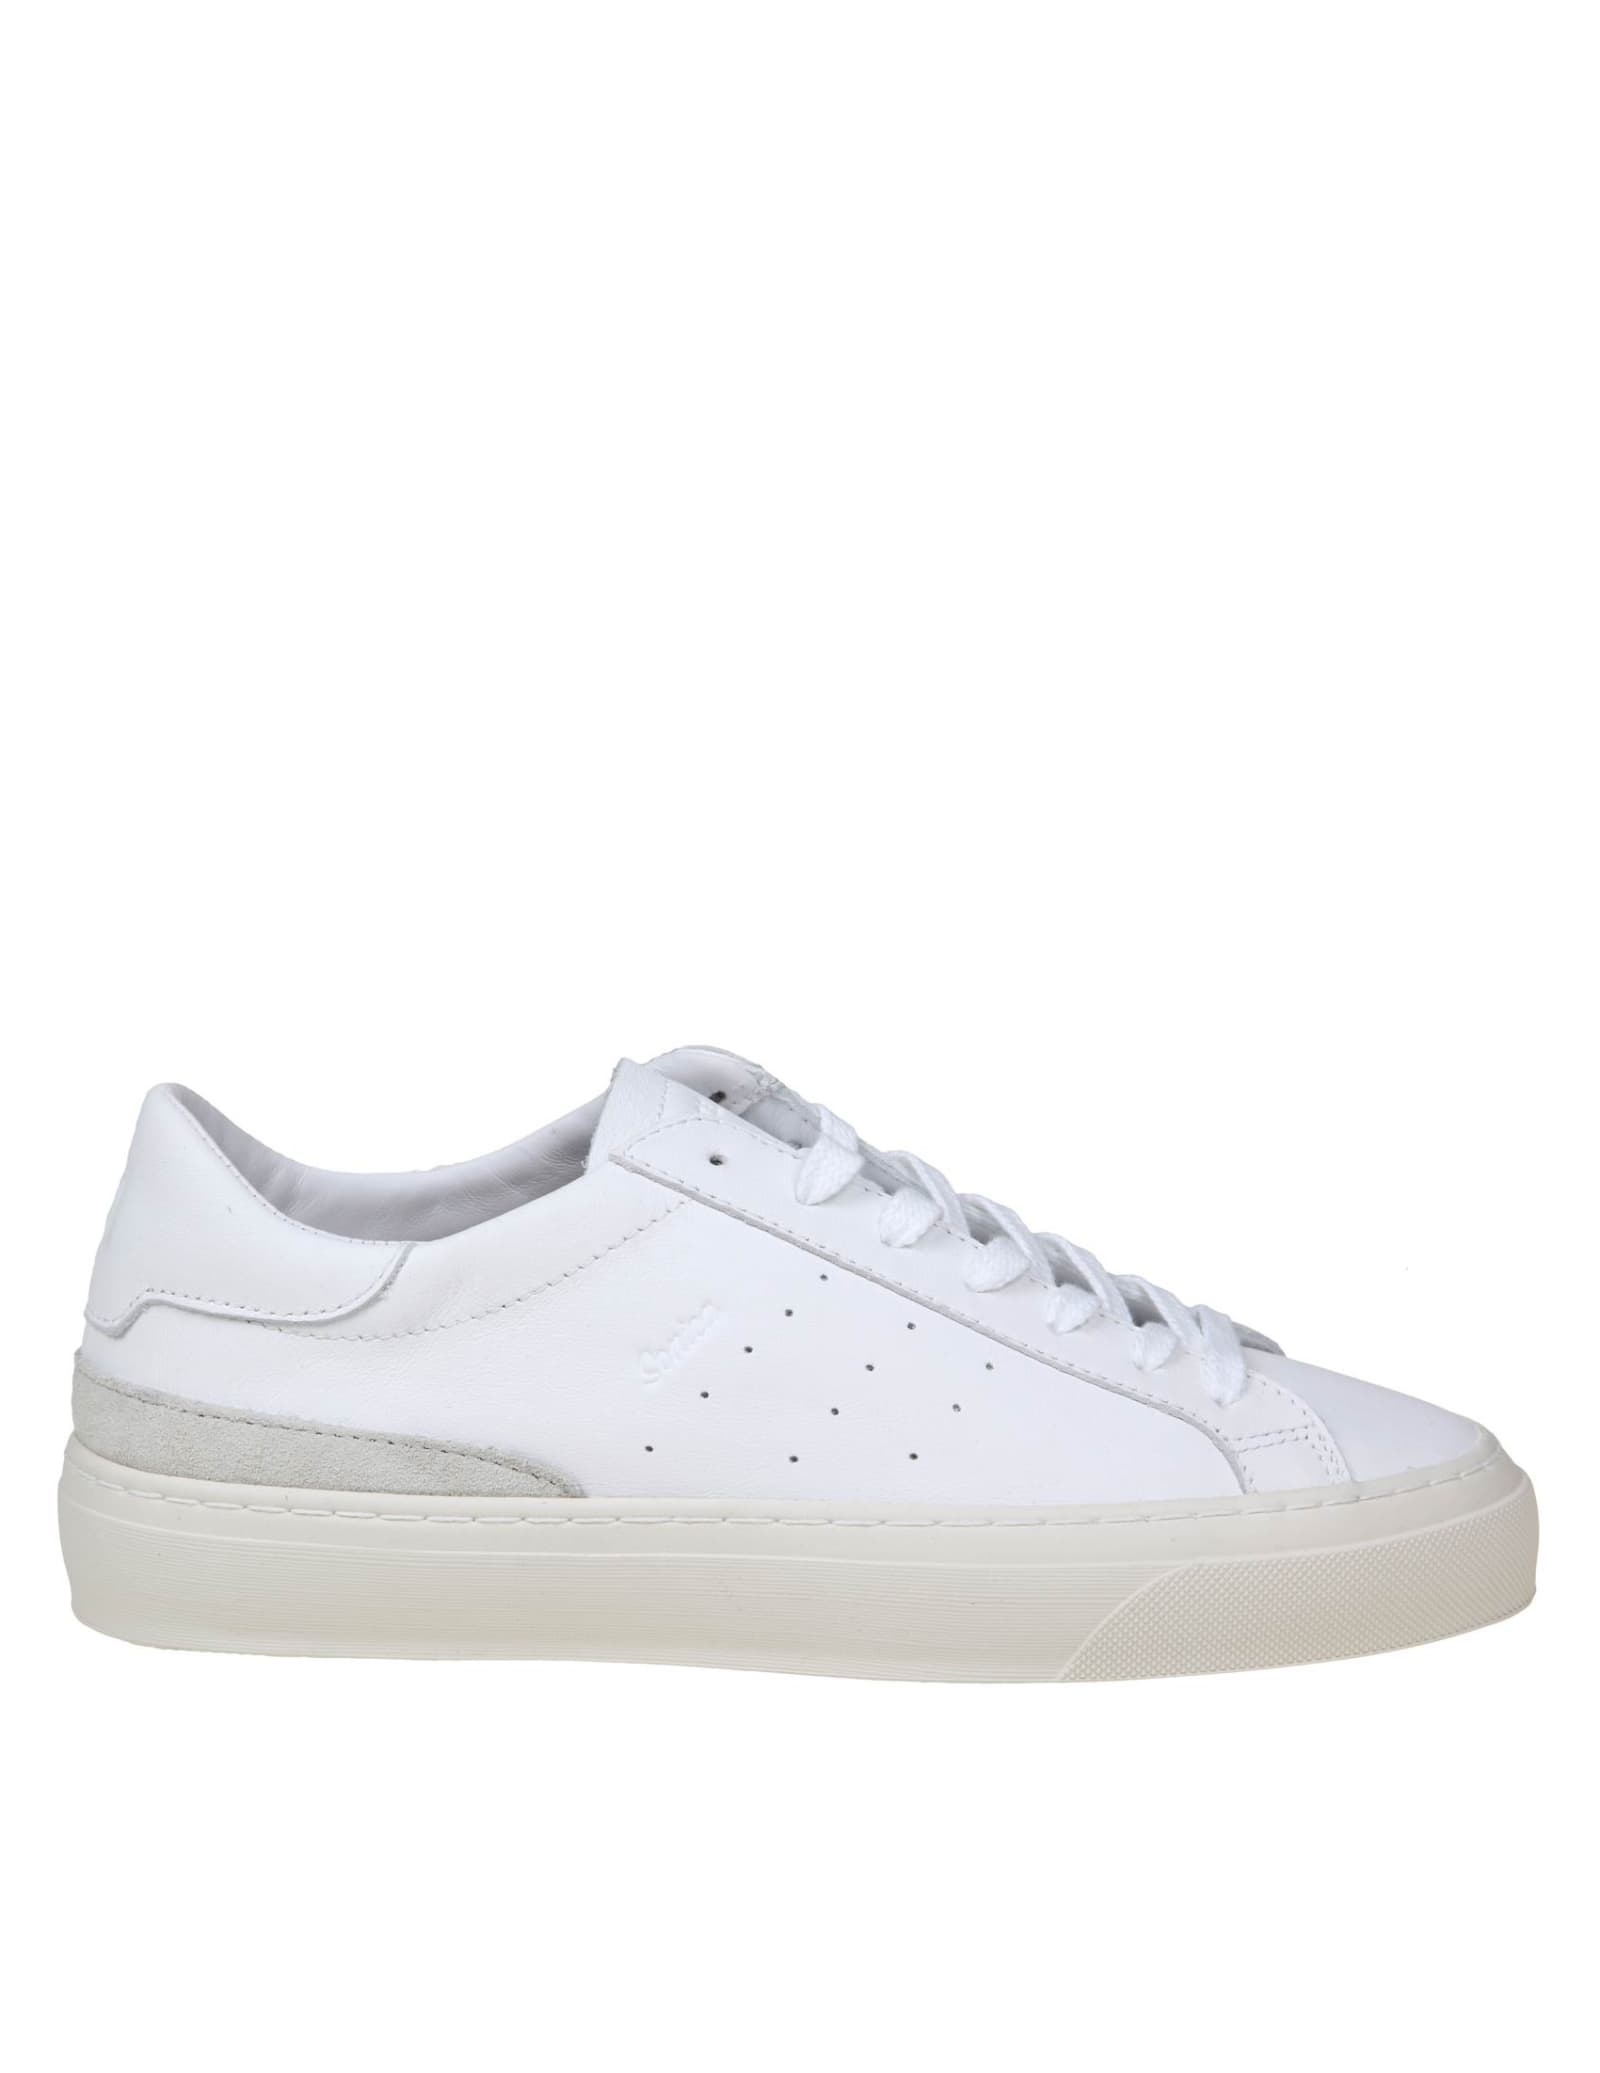 DATE SONICA trainers IN WHITE LEATHER